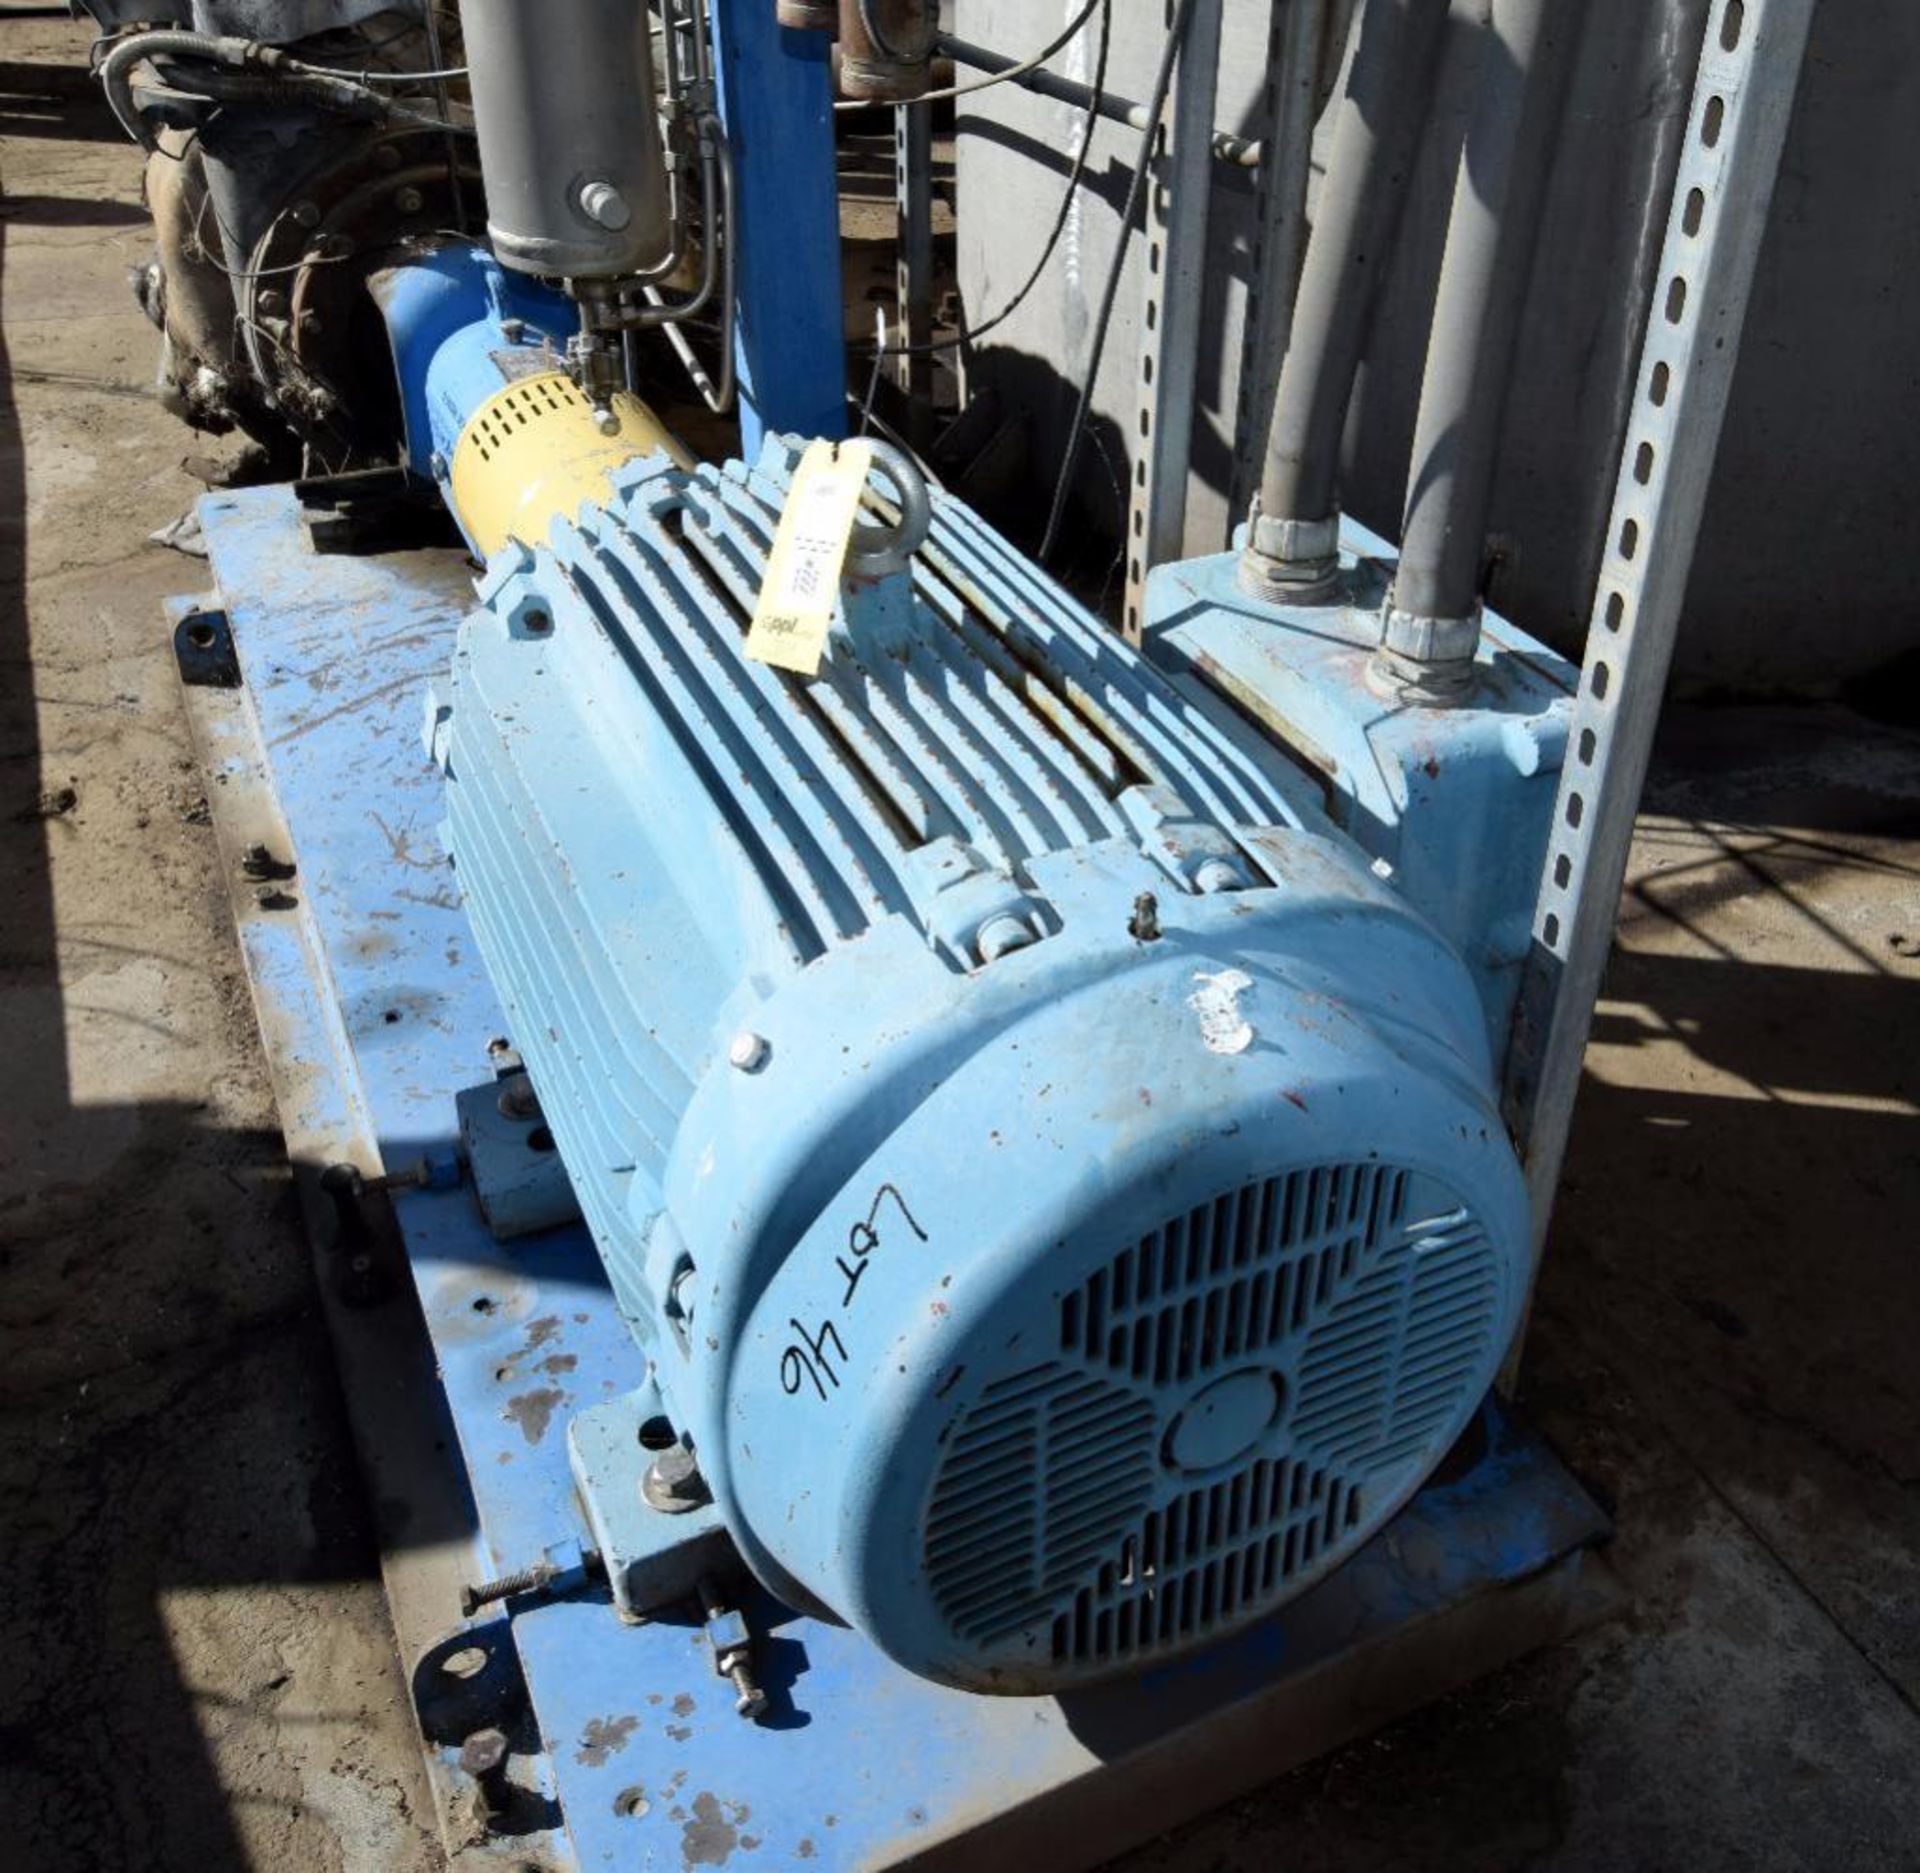 Discflo Pump, Stainless Steel, Model 806-17, Discpac 2HHD, Serial# 6669. Driven by a 200hp XP motor. - Image 4 of 11